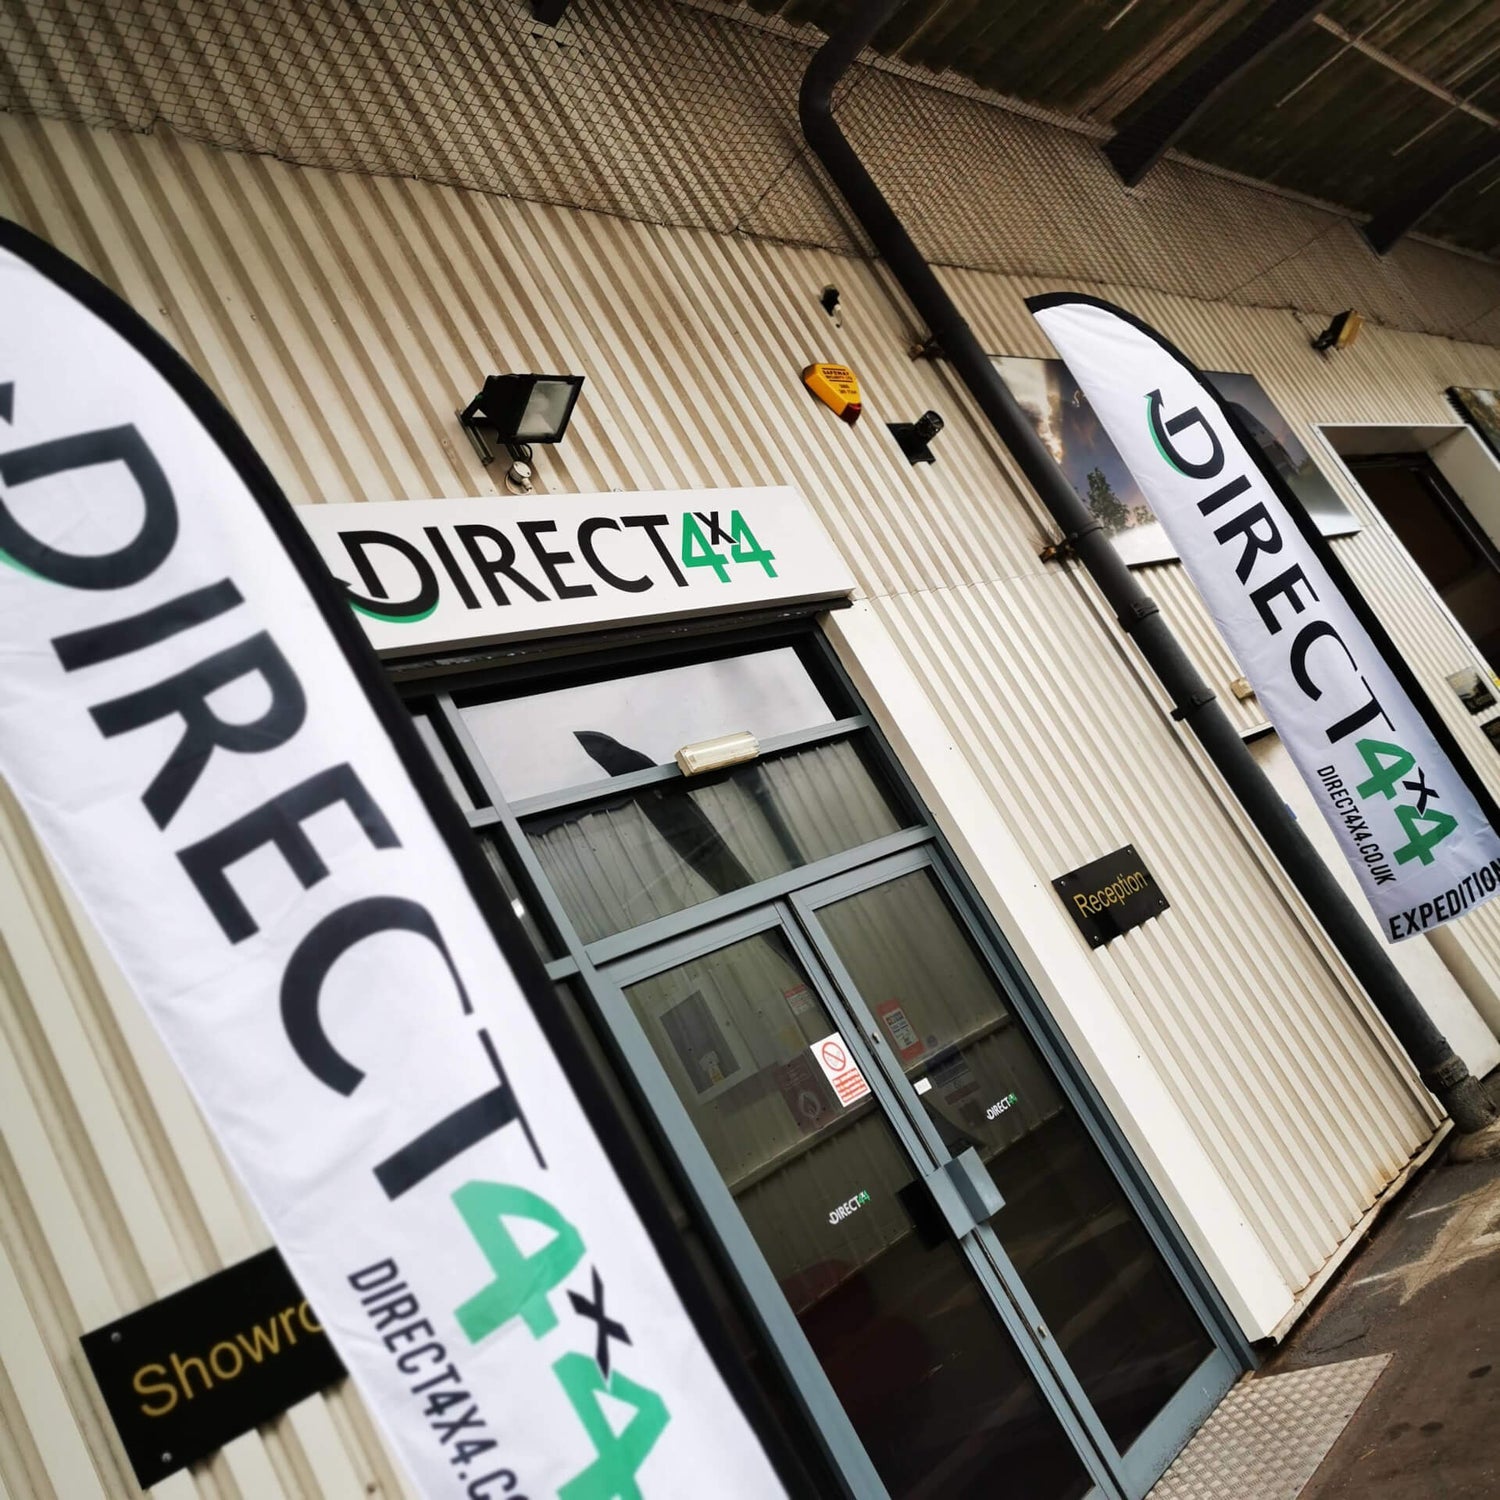 Direct4x4 Manufacturing Ltd. main front entrance double glass doors with stand-up flags on the pathway outside.